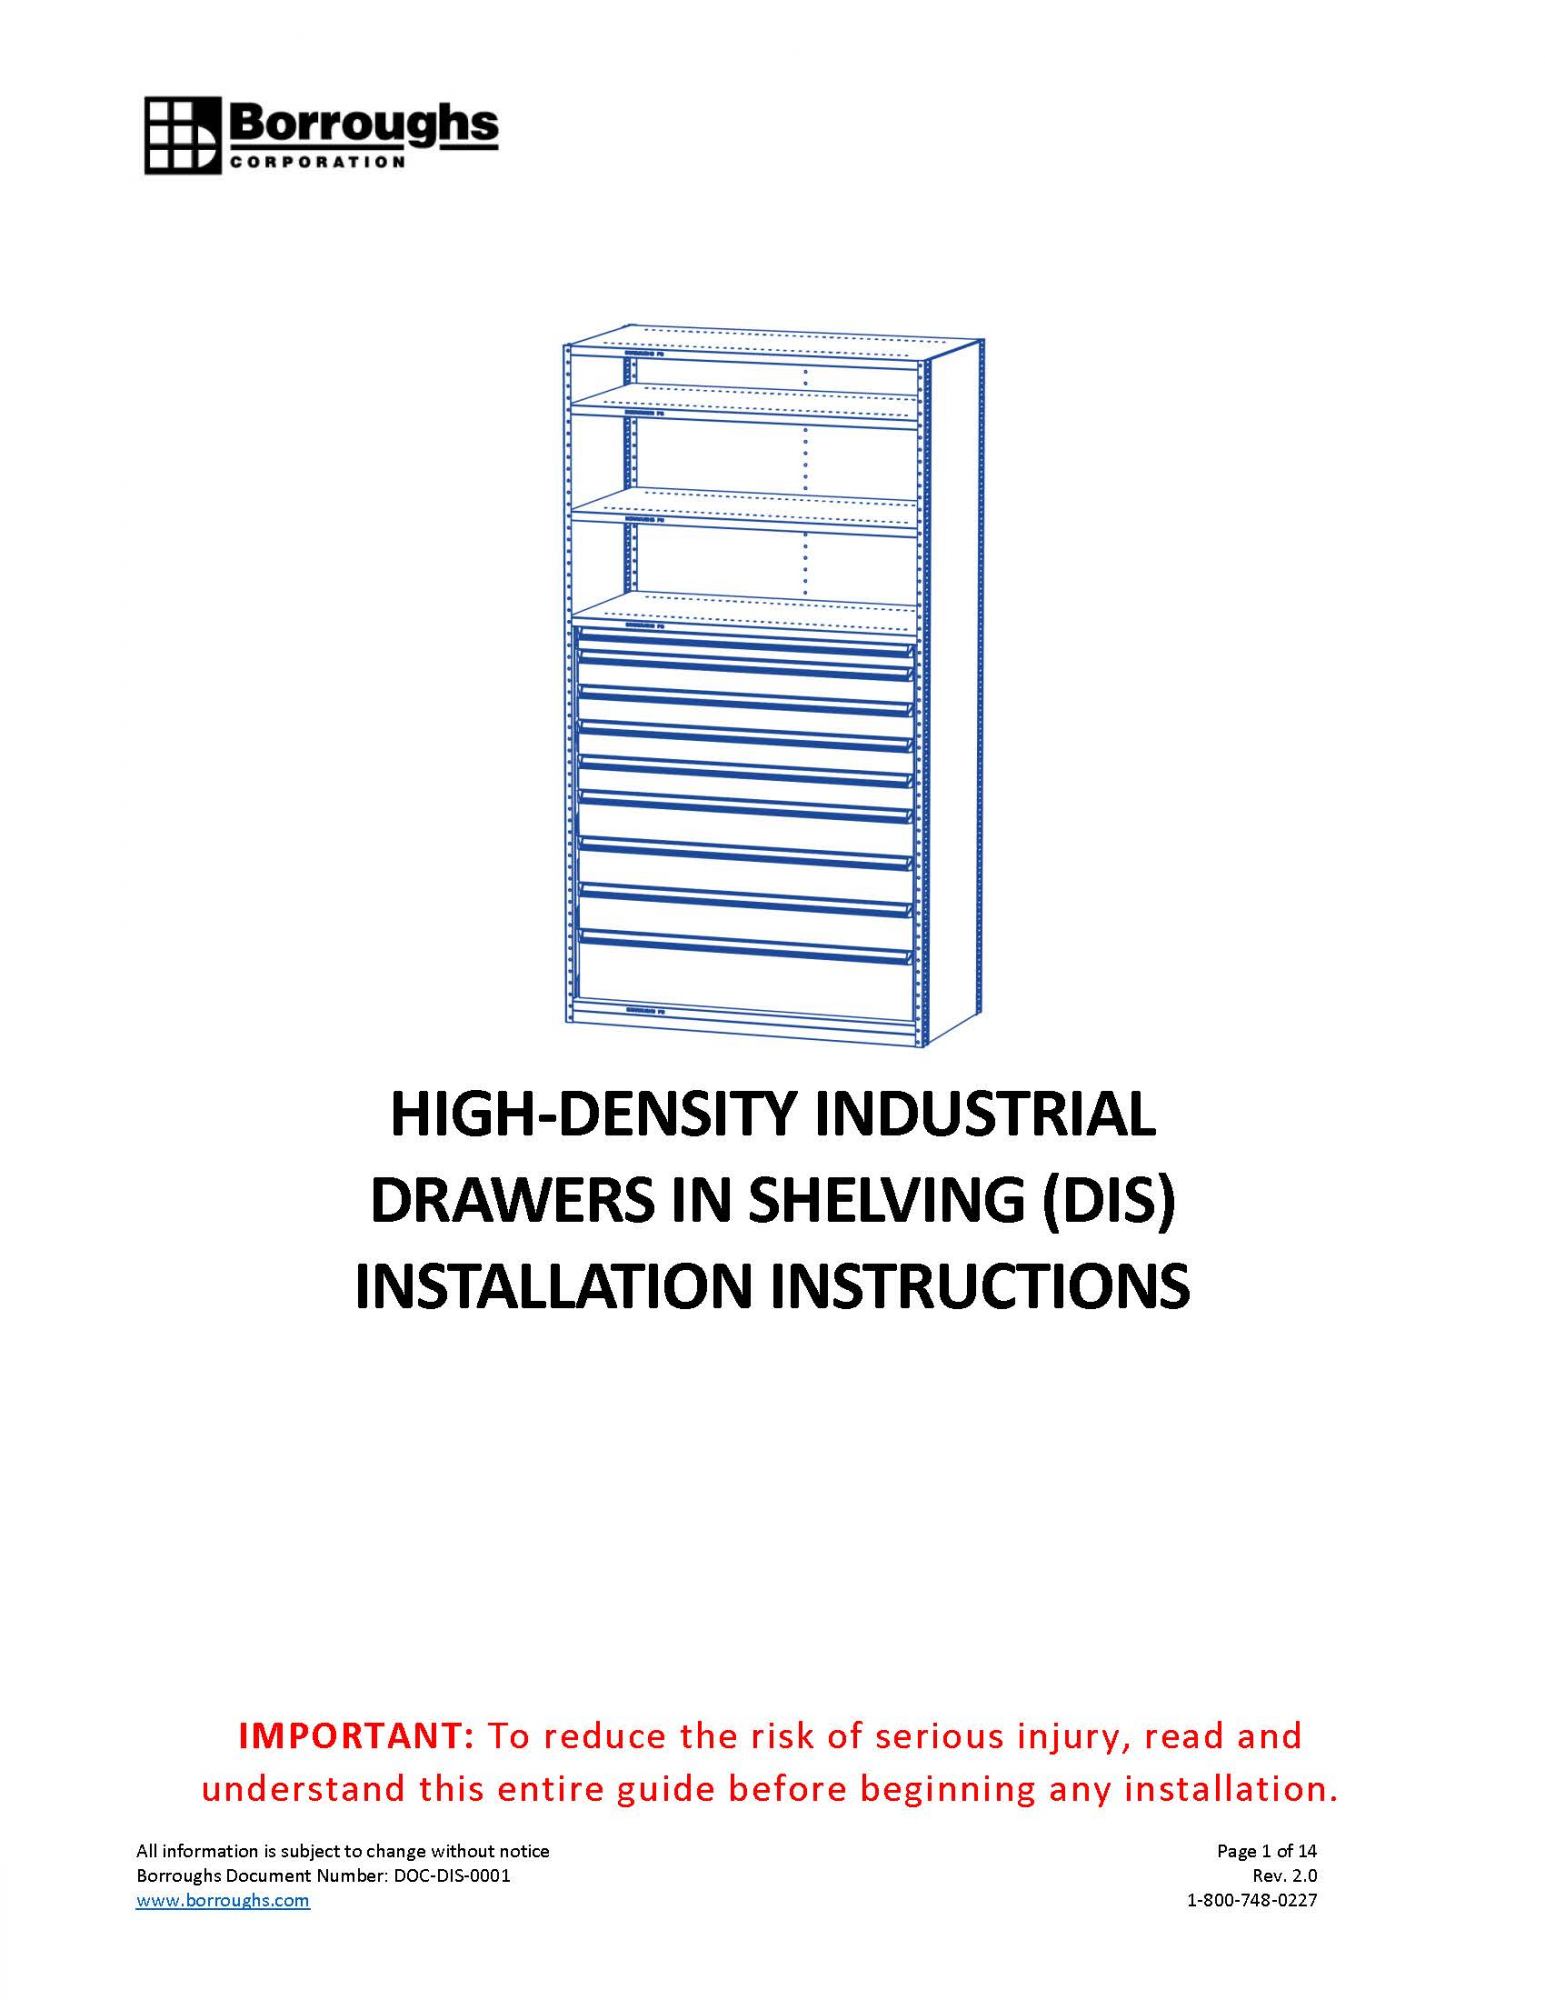 Shelving with drawers installation